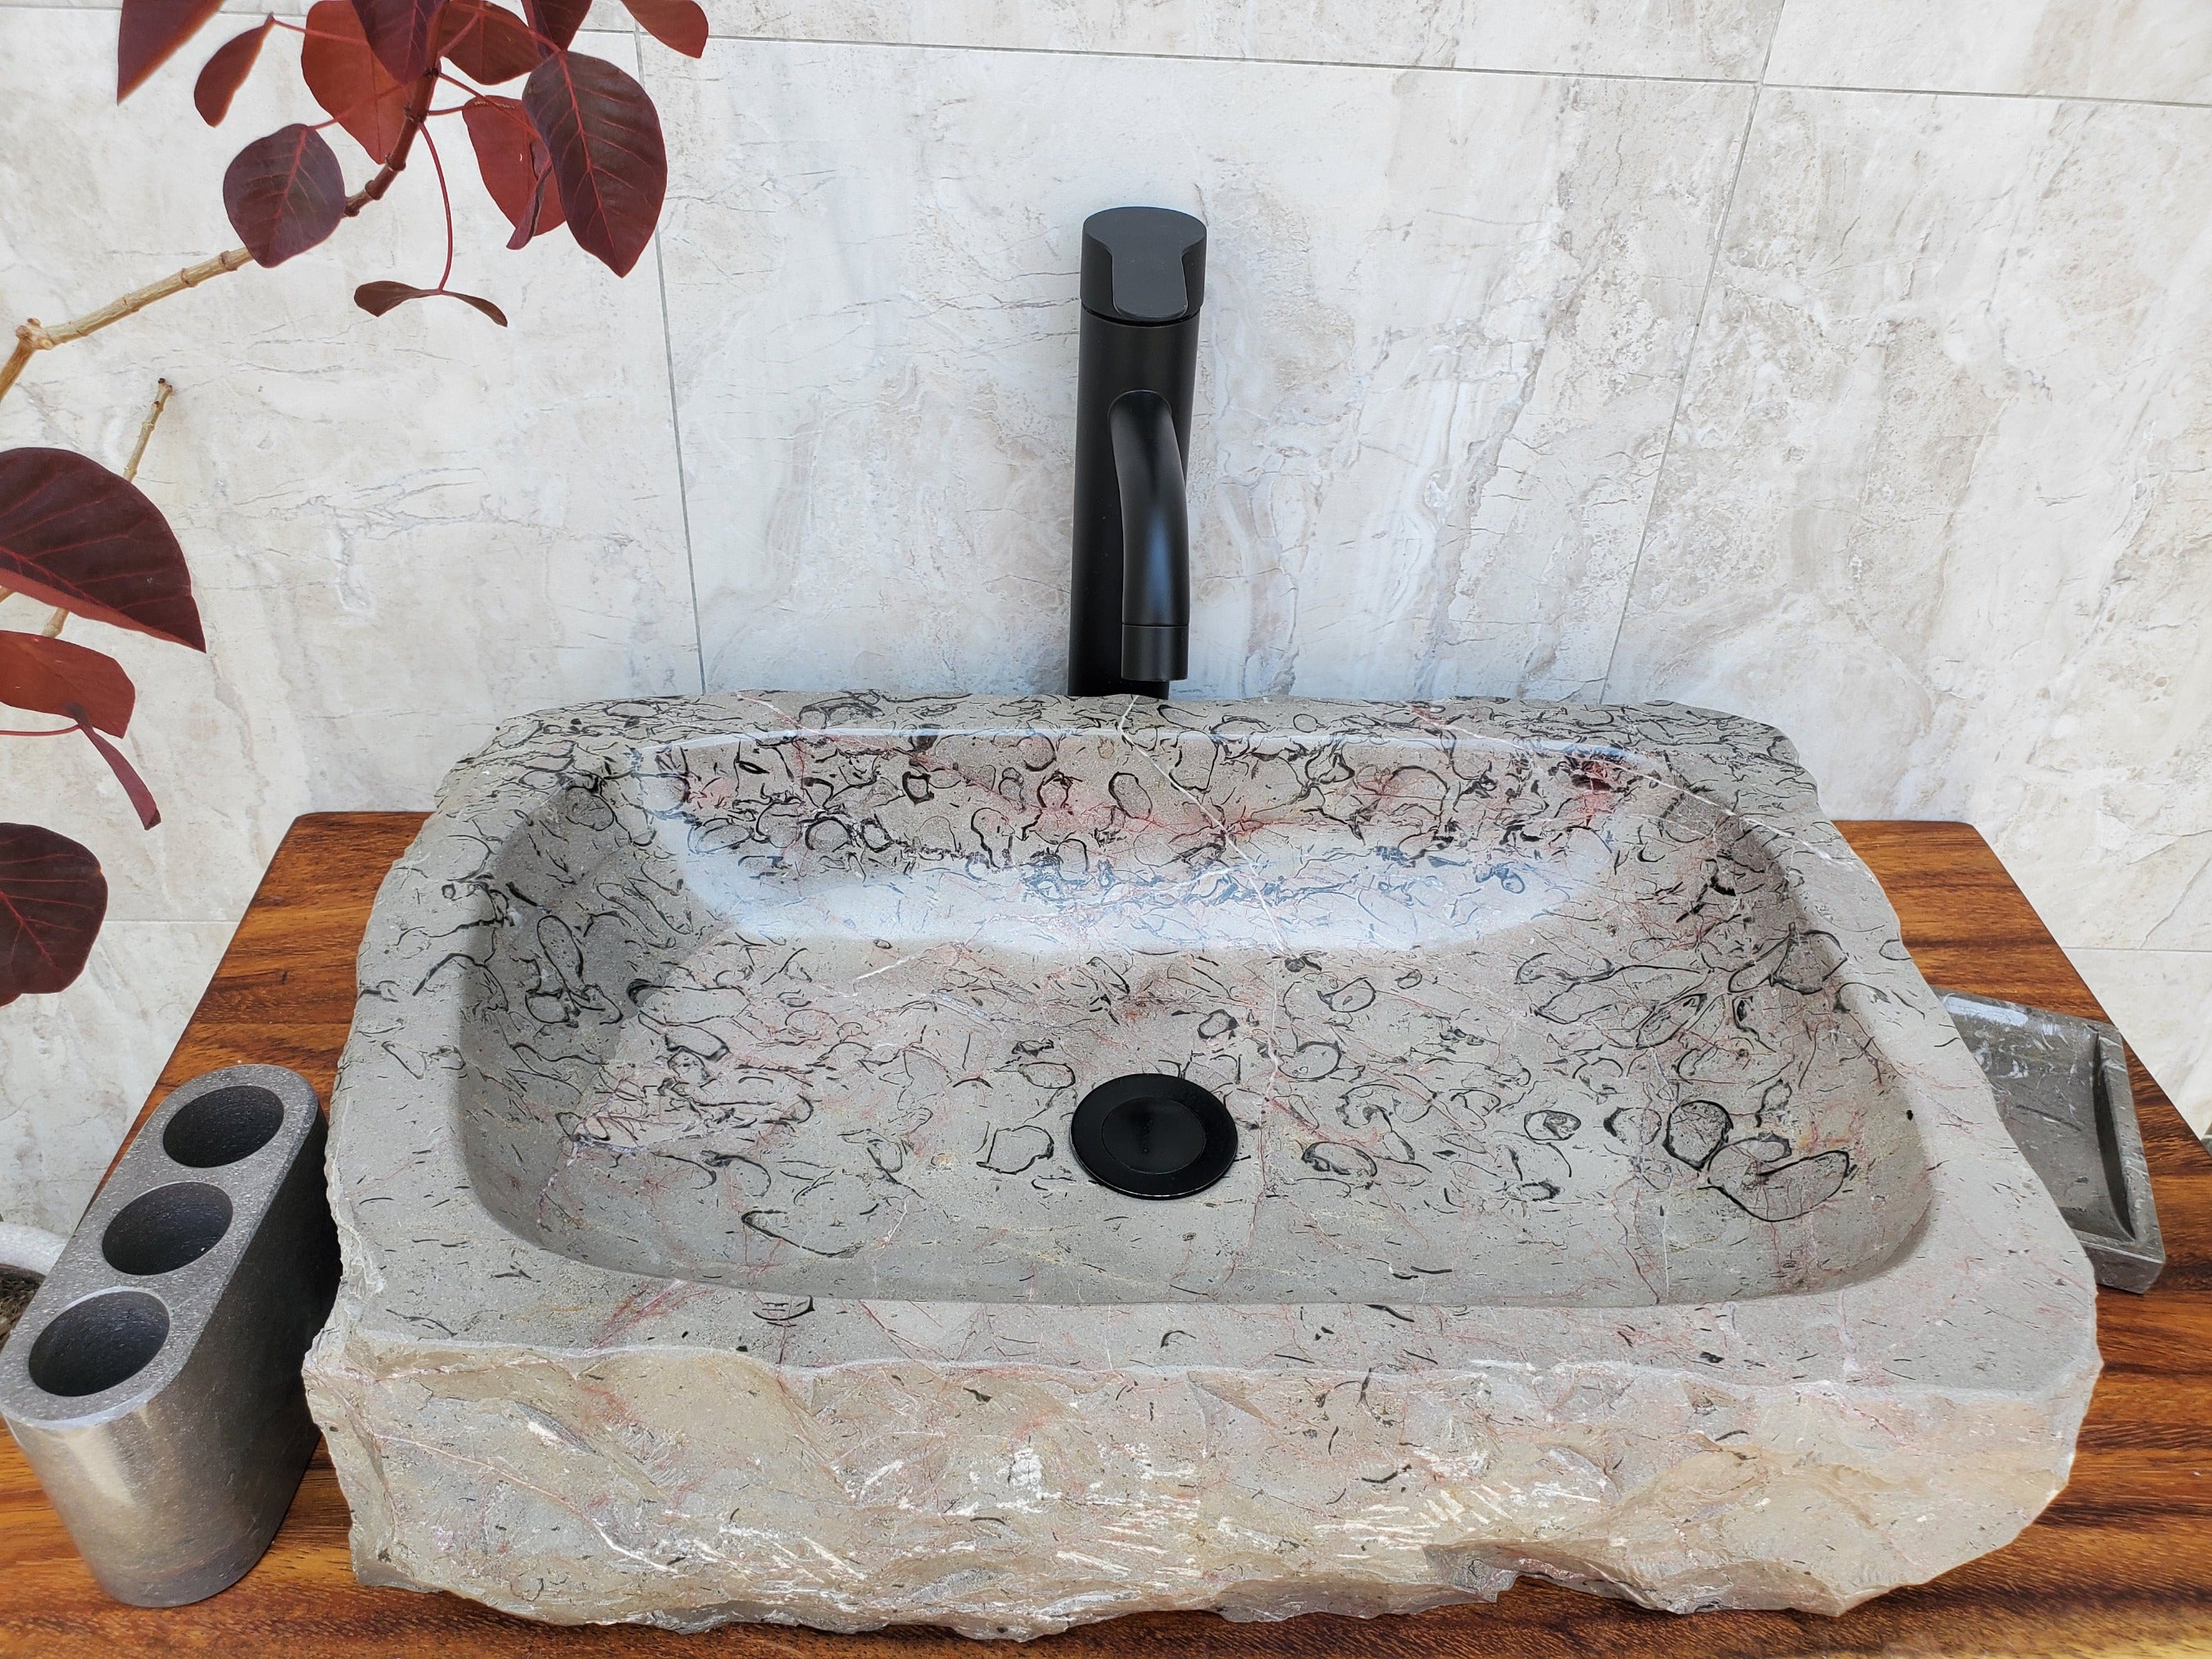 Brown Marble Stone Vessel Bathroom Sink. Pattern with Black Half Circles. Square Above Counter. One of a kind. Handmade in Mexico. Ships from the USA. Buy now at www.felipeandgrace.com.